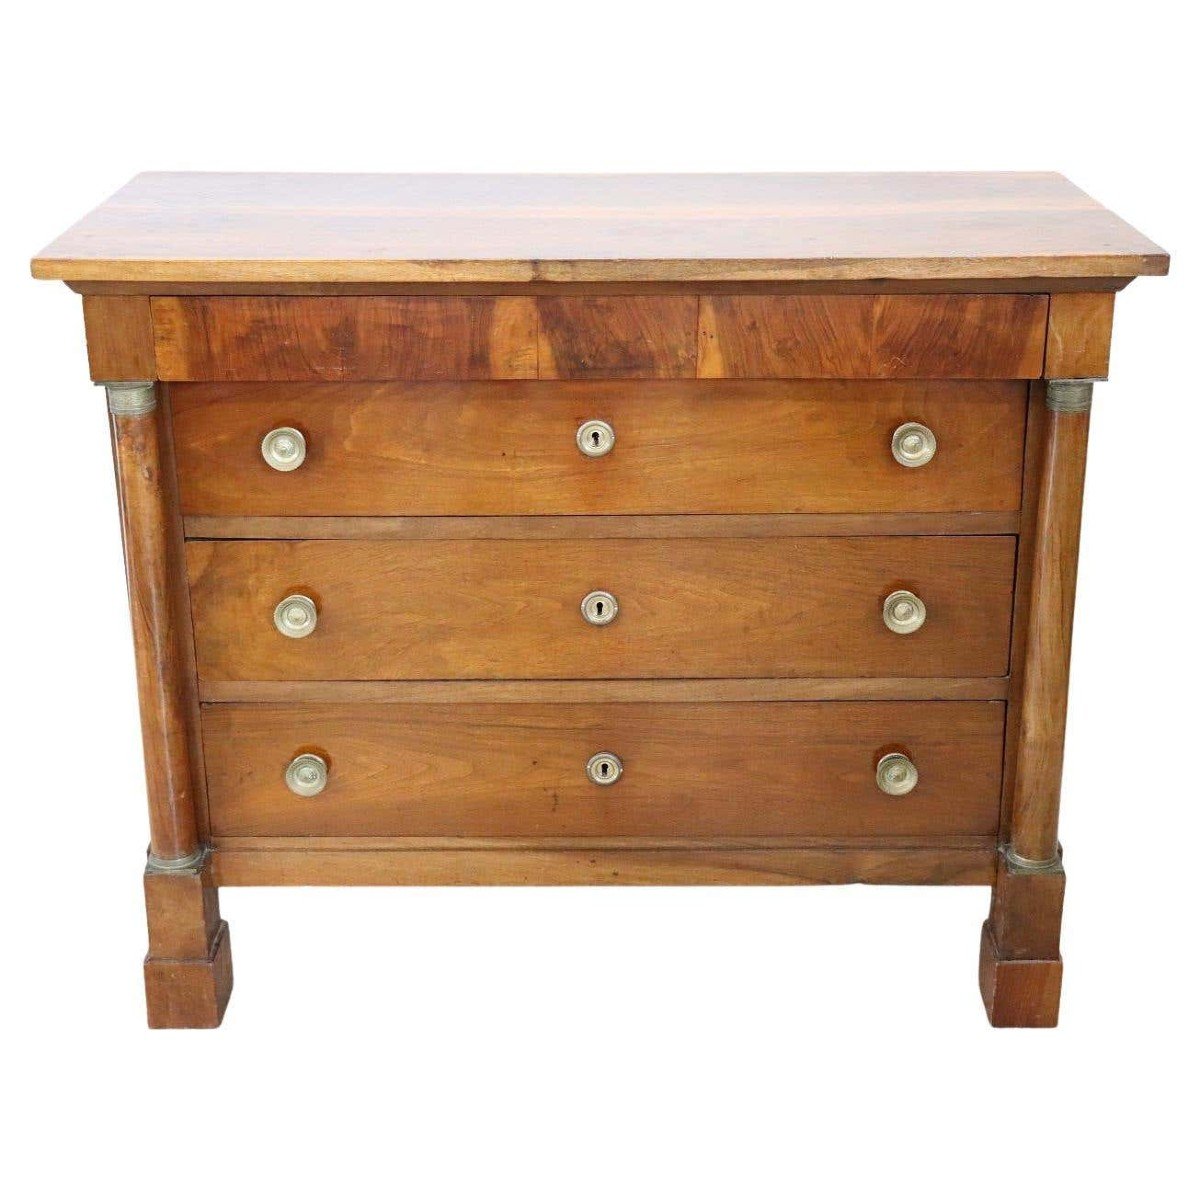 Antique Solid Walnut Chest Of Drawers 19th Century